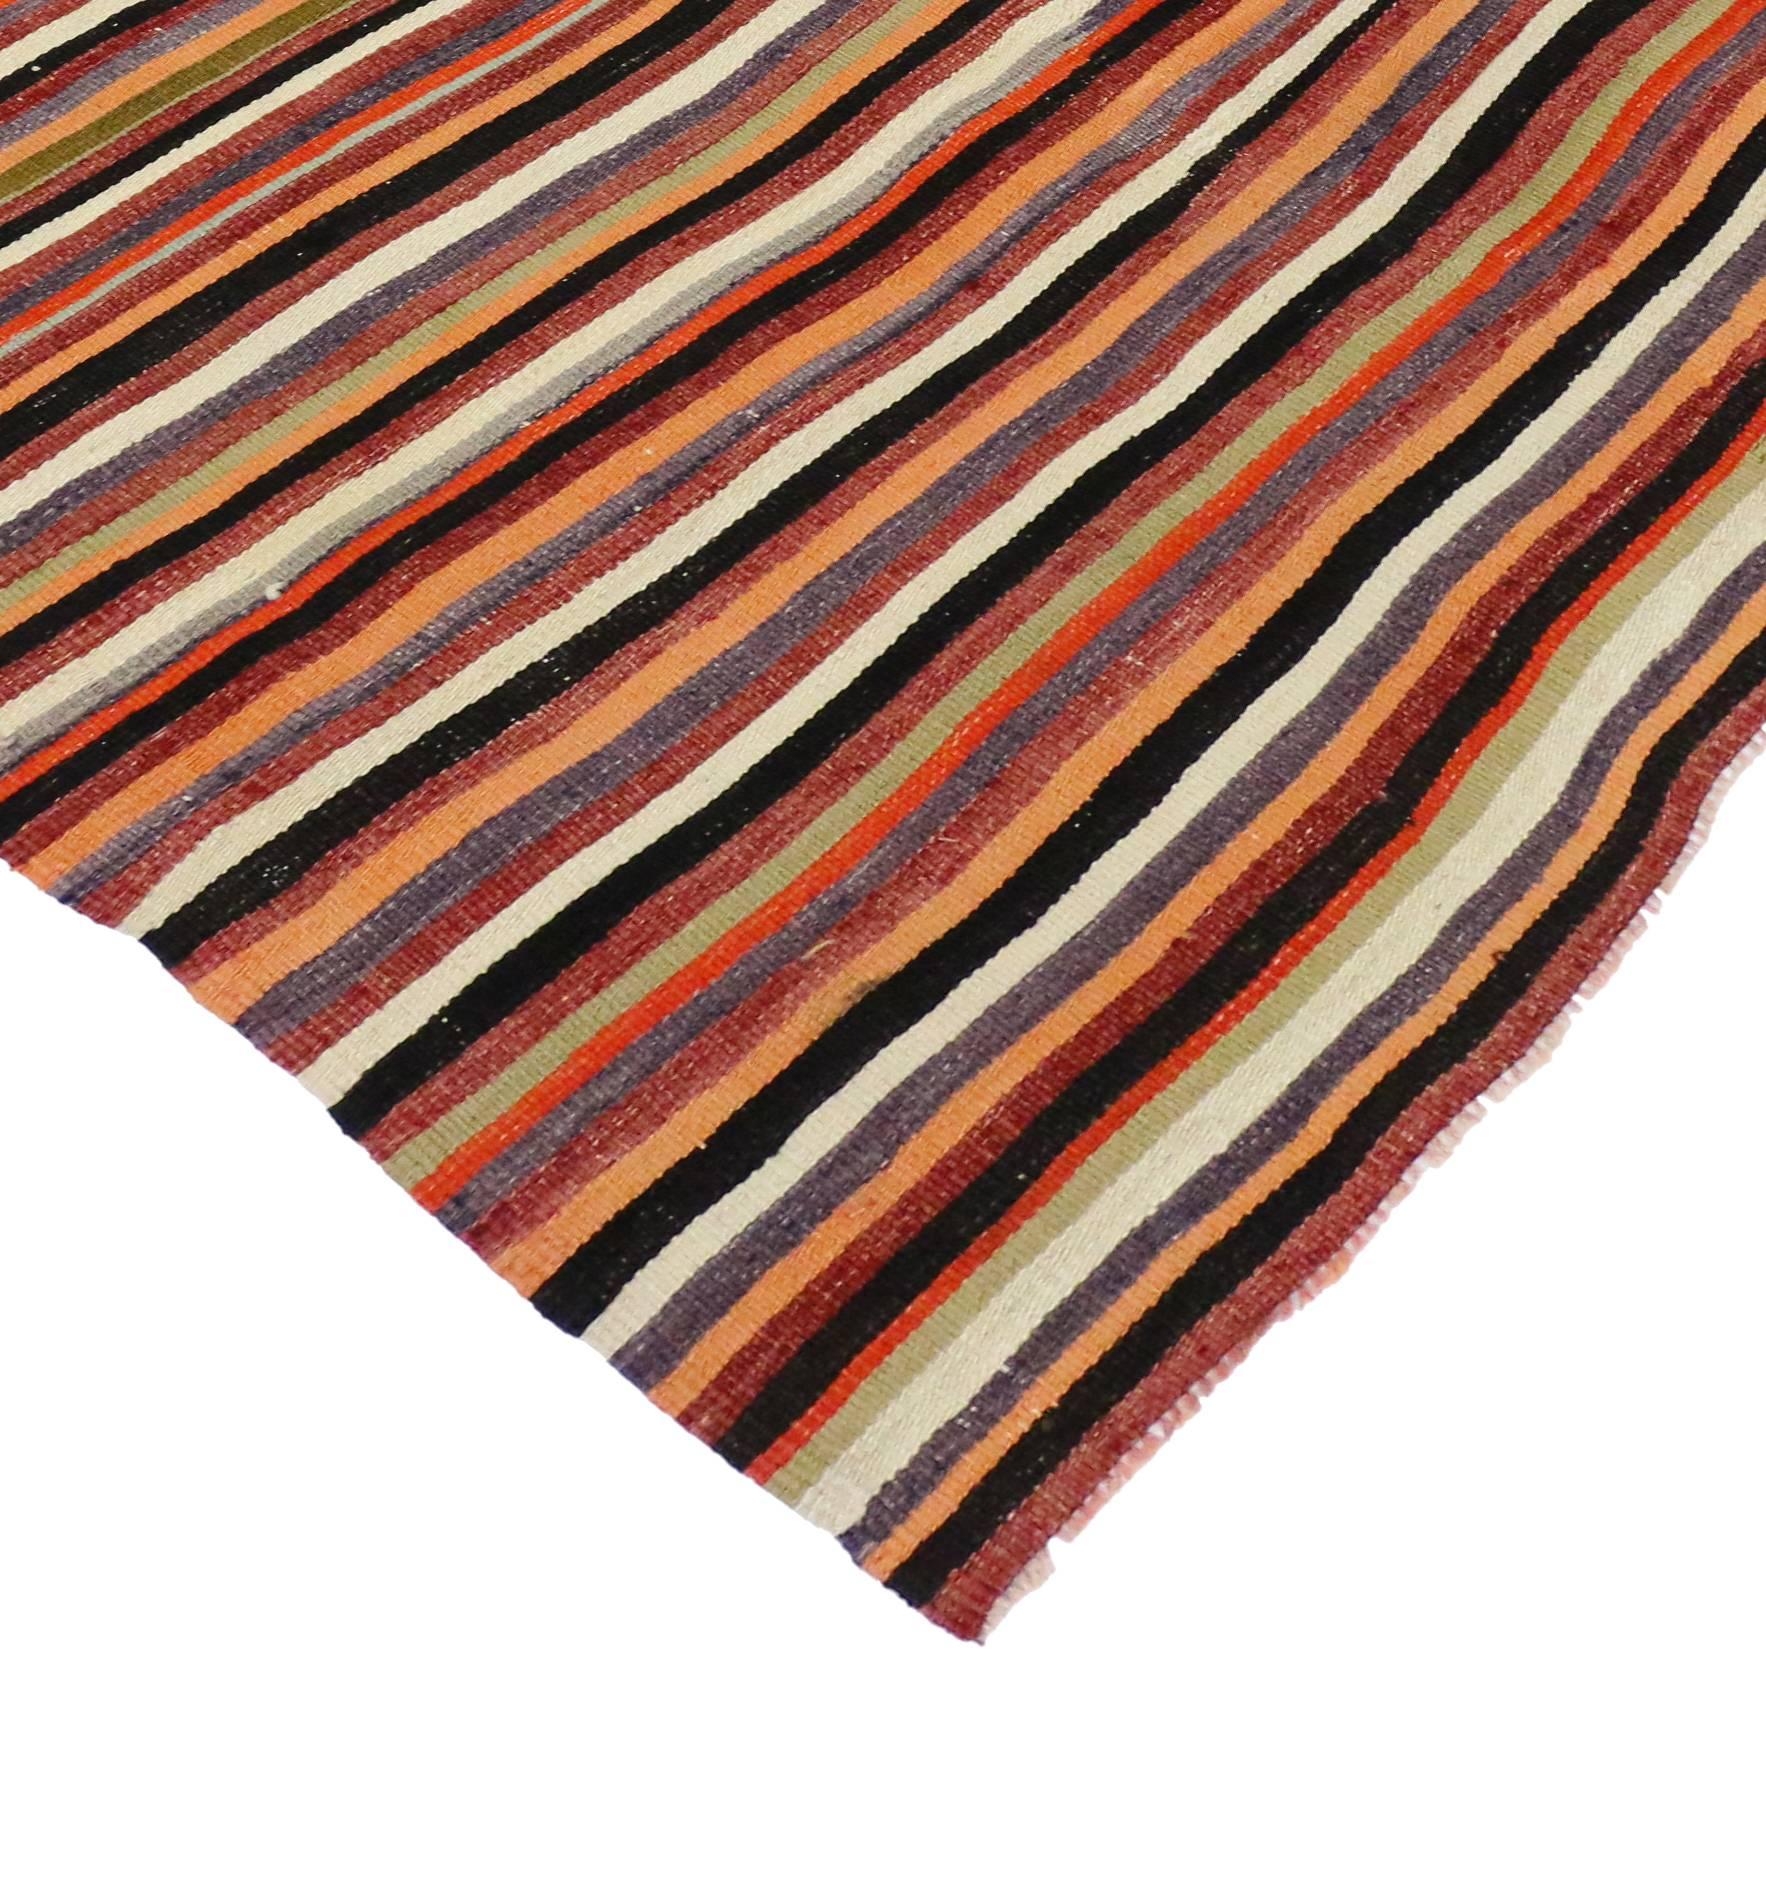 74871, vintage Turkish Kilim rug with stripes. This handwoven wool vintage Turkish kilim rug features alternating stripes rendered in variegated shades of dark red, orange, ivory, violet, light green, peach, mint, buff, olive and black. The